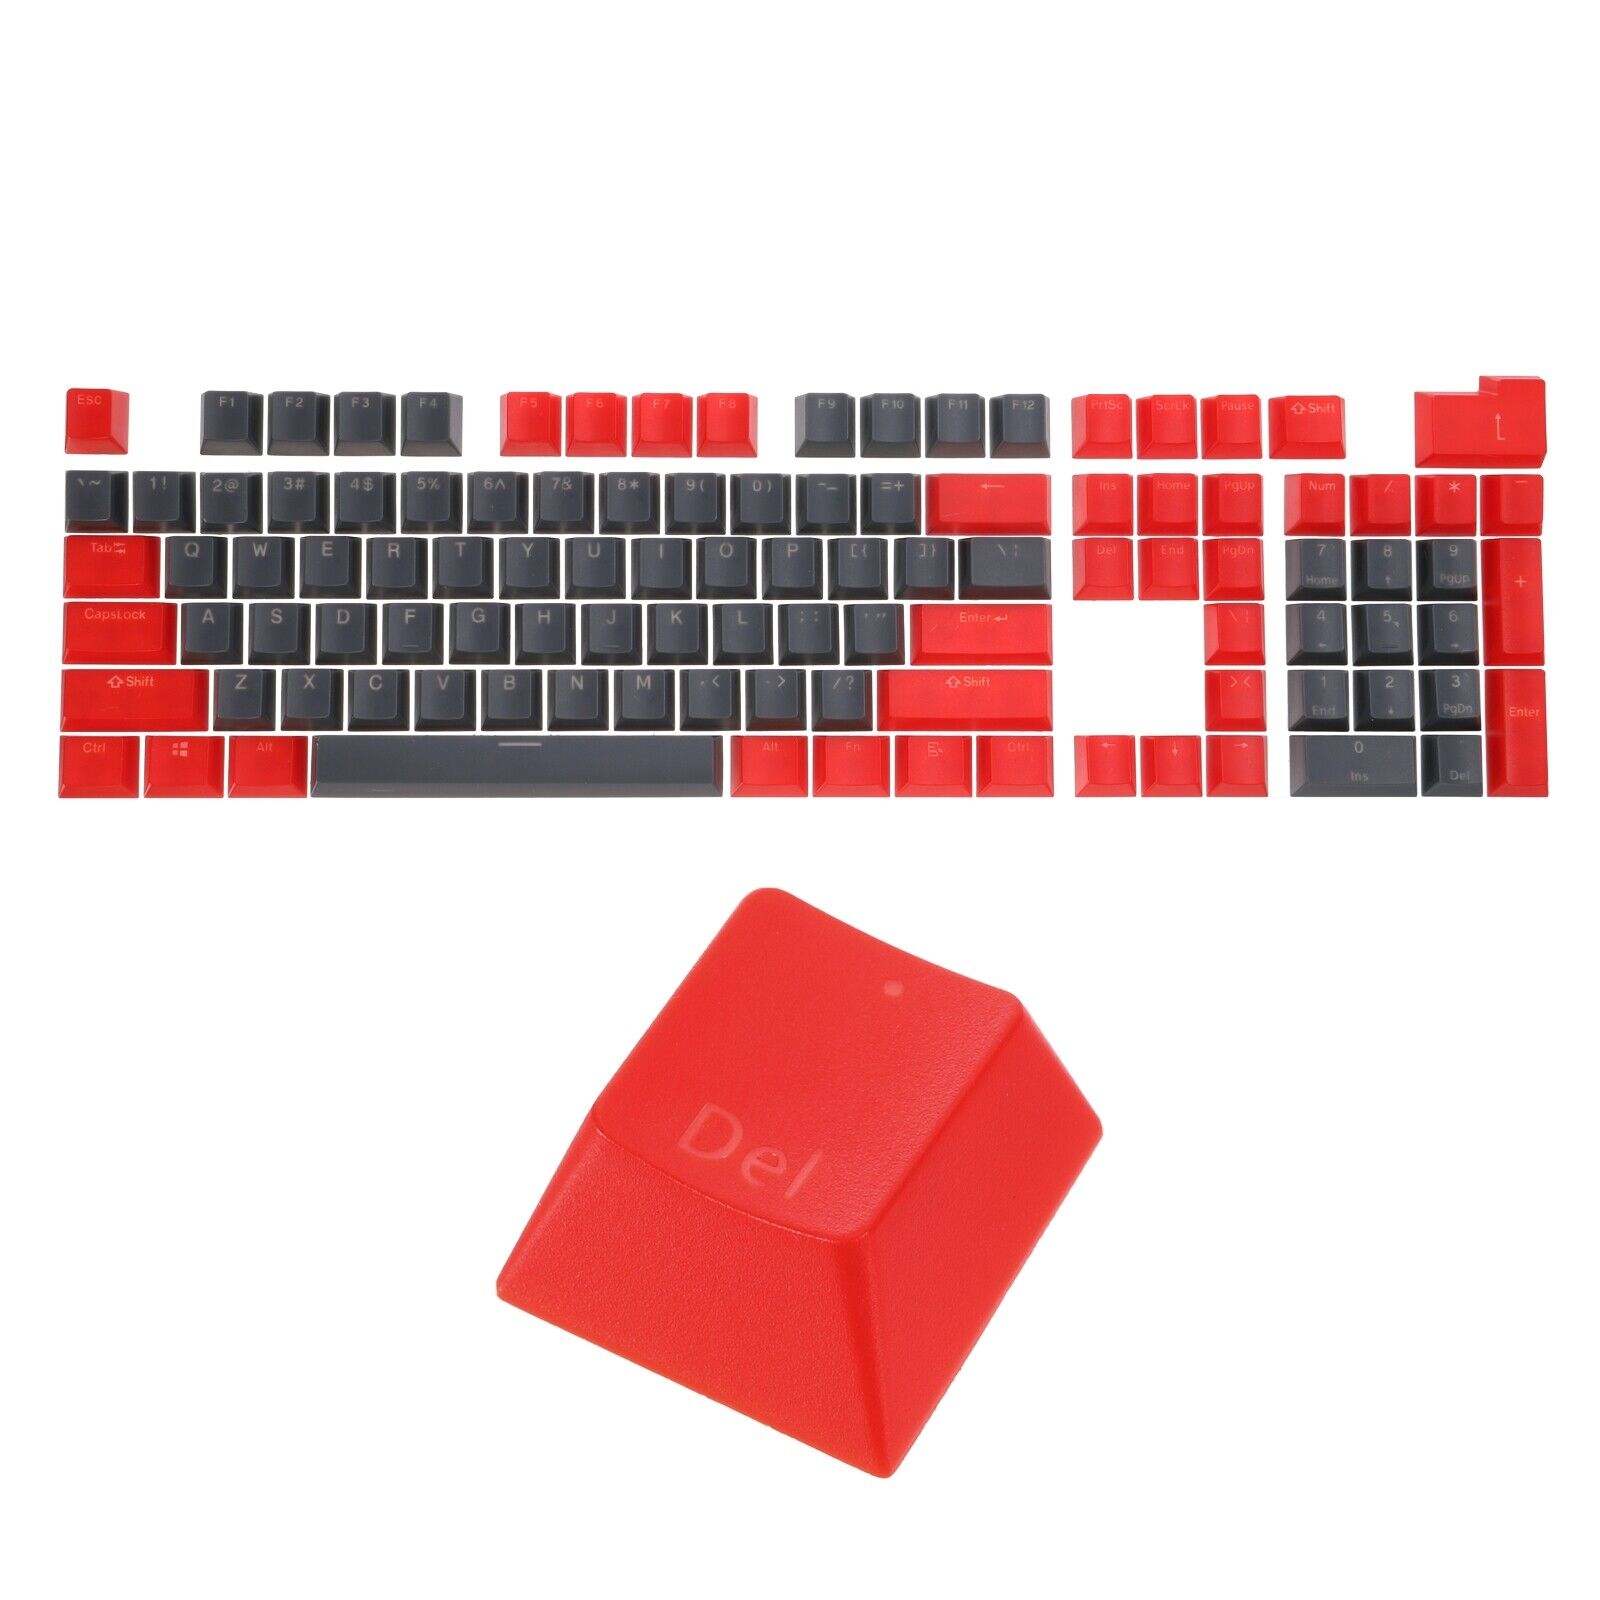 104 Keys Pudding Keycaps for Mechanical Keyboard Layout, Grey & Red